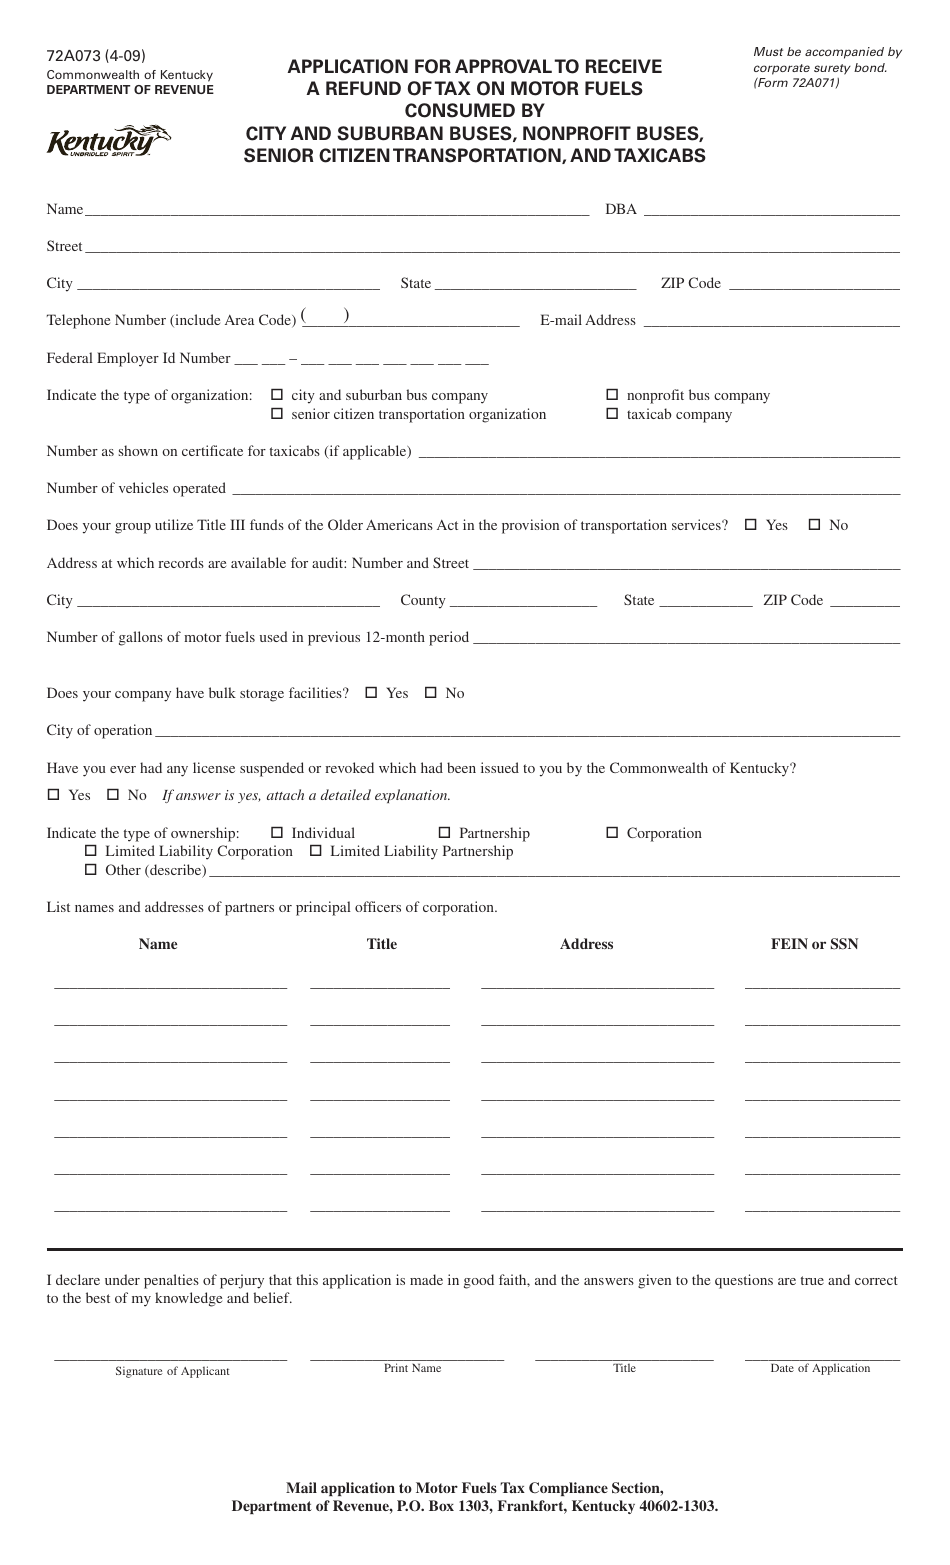 Form 72A073 Application for Approval to Receive a Refund of Tax on Motor Fuels Consumed by City and Suburban Buses, Nonprofit Buses, Senior Citizen Transportation, and Taxicabs - Kentucky, Page 1